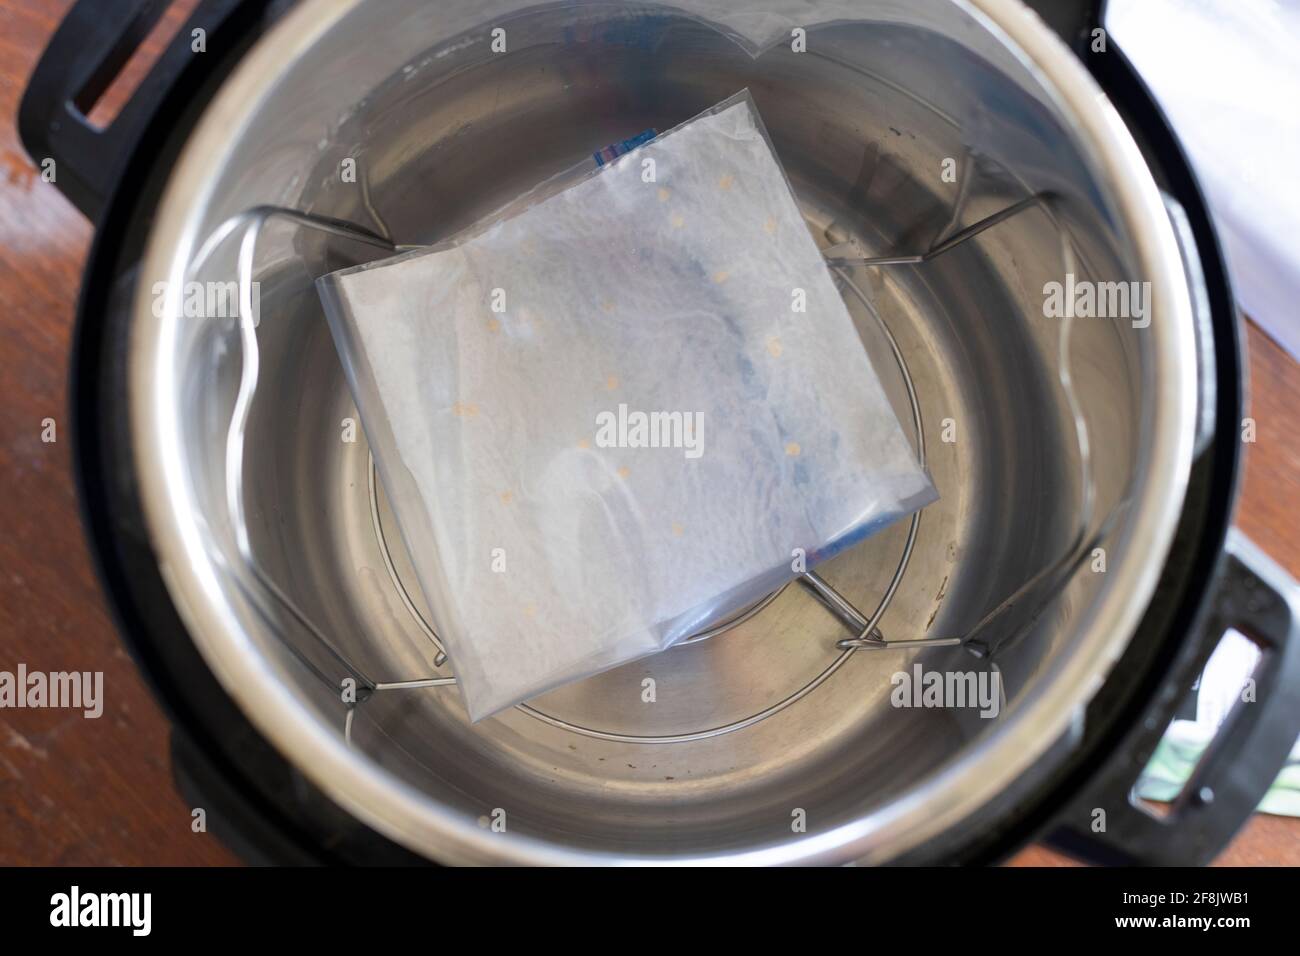 Starting Seeds in an Instant Pot, April 2021 Stockfoto